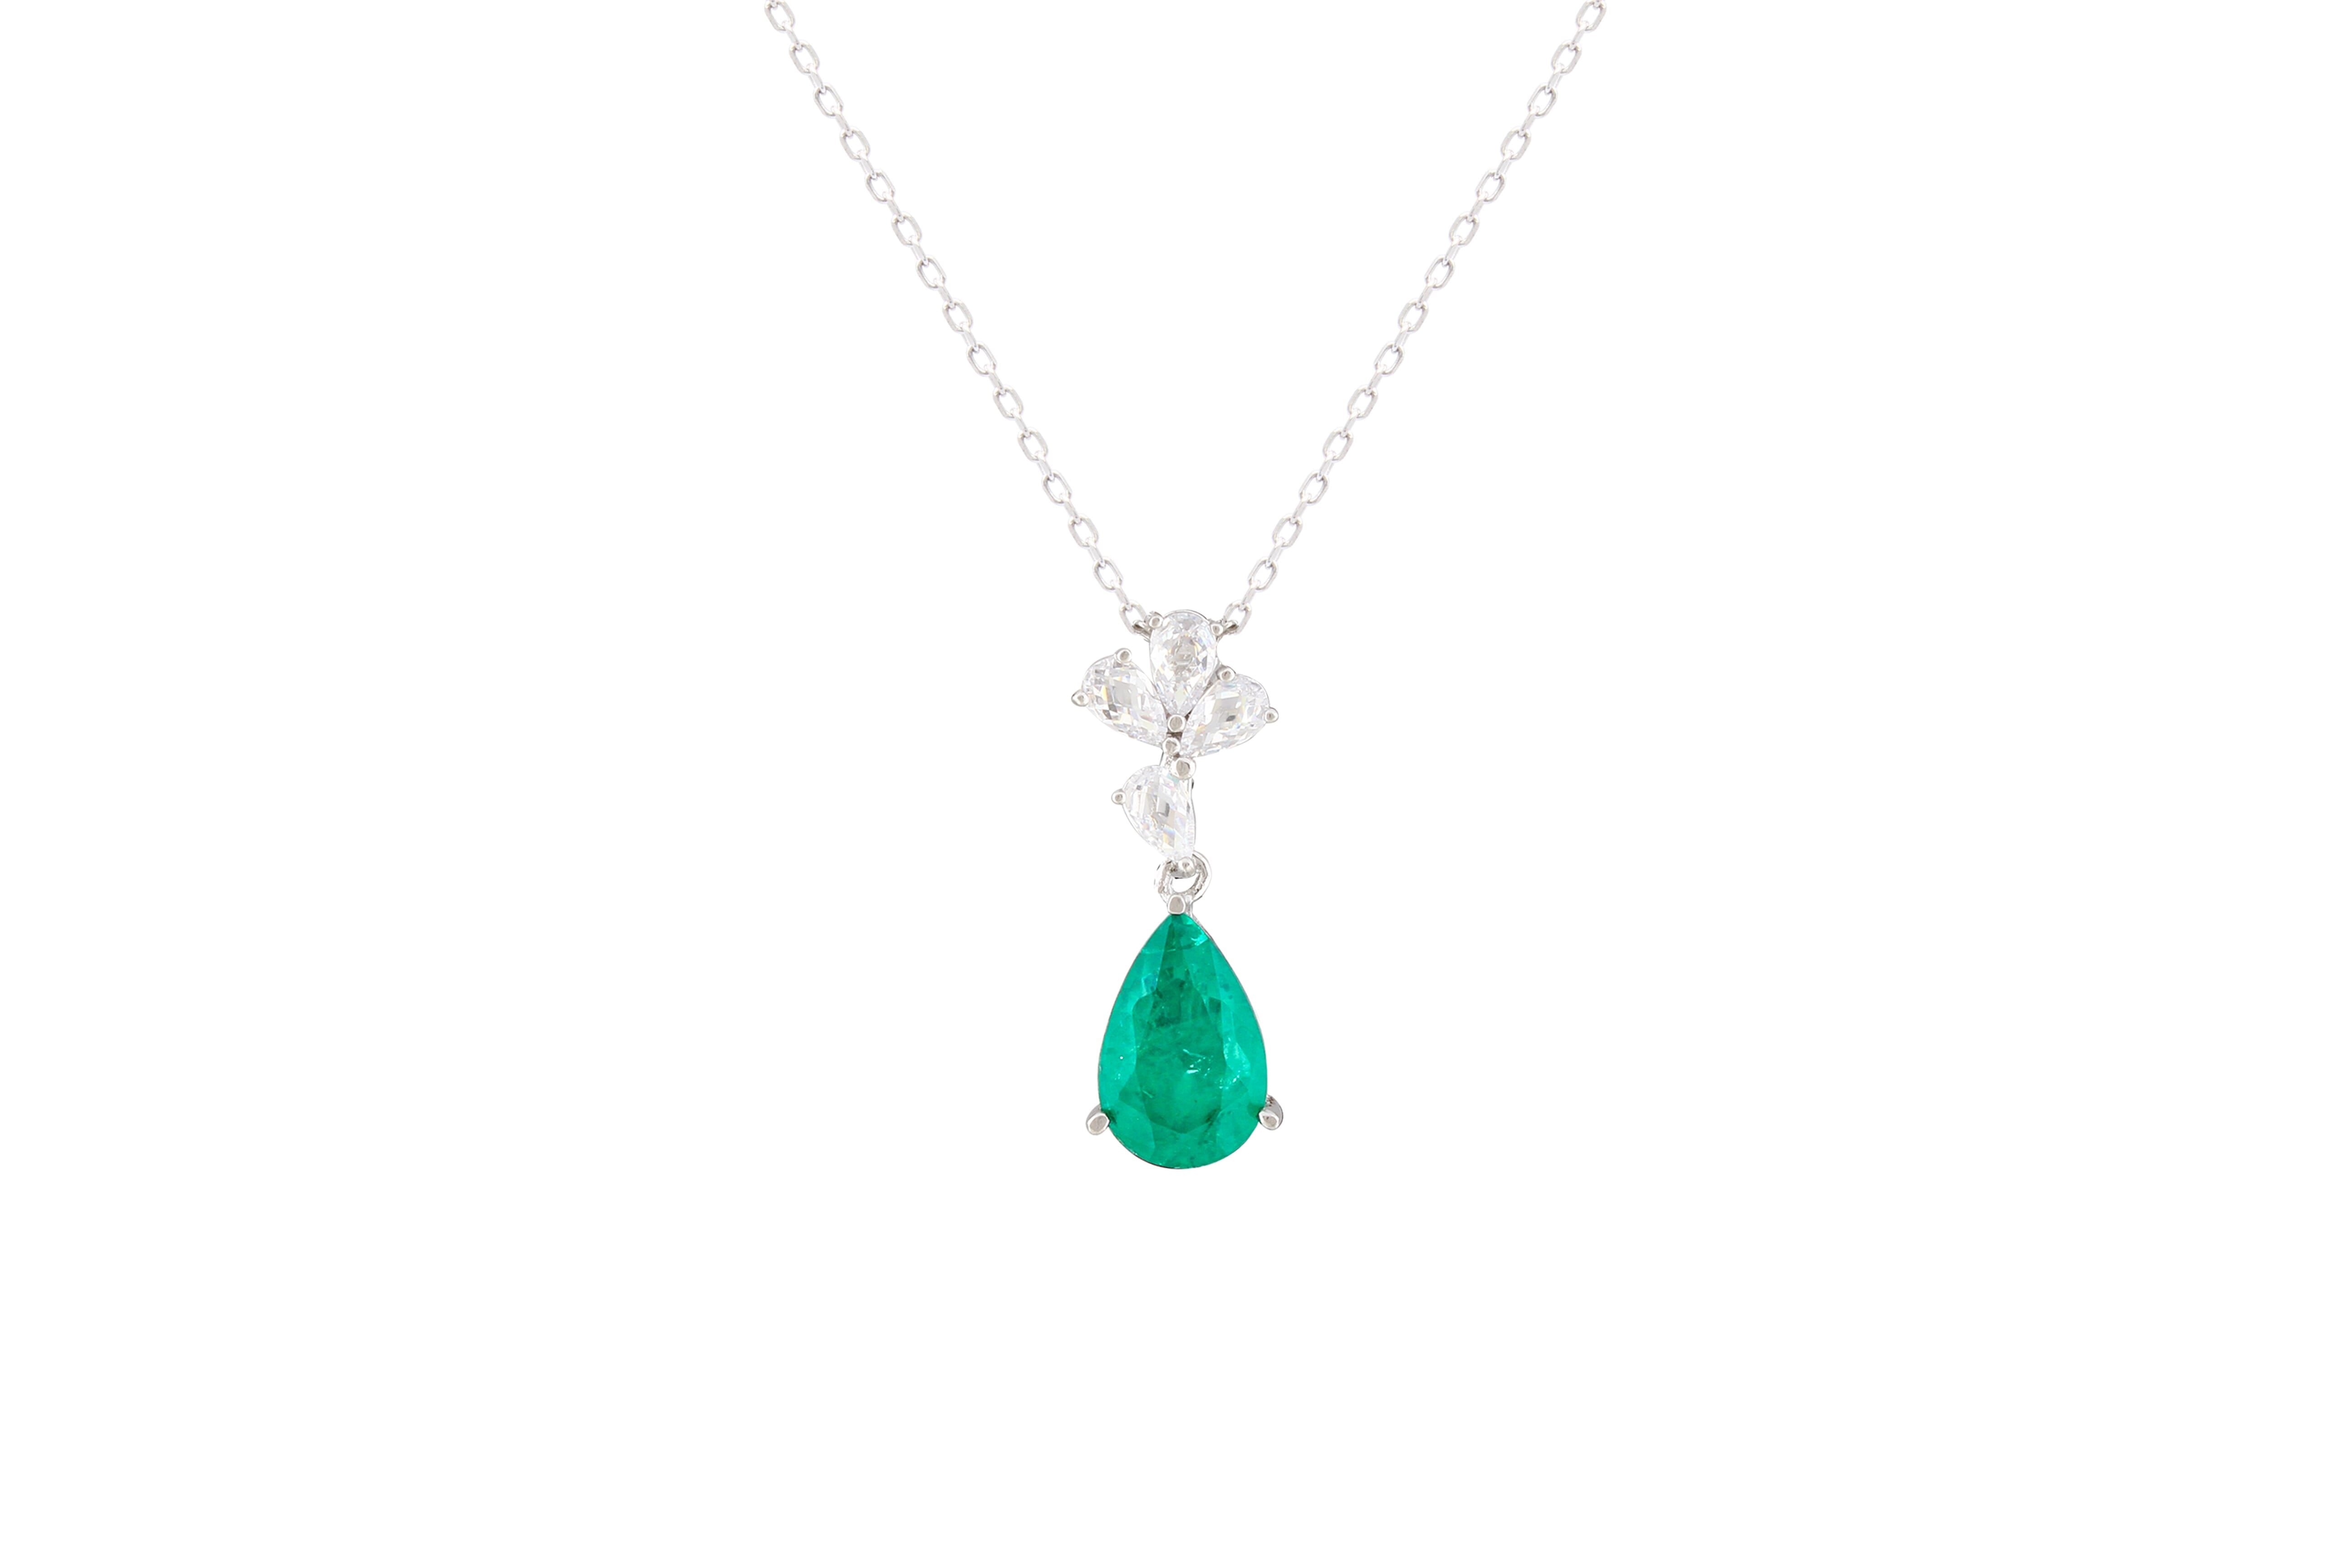 Asfour Crystal Chain Necklace With Emerald Pear Zircon Pendant In 925 Sterling Silver ND0041-G